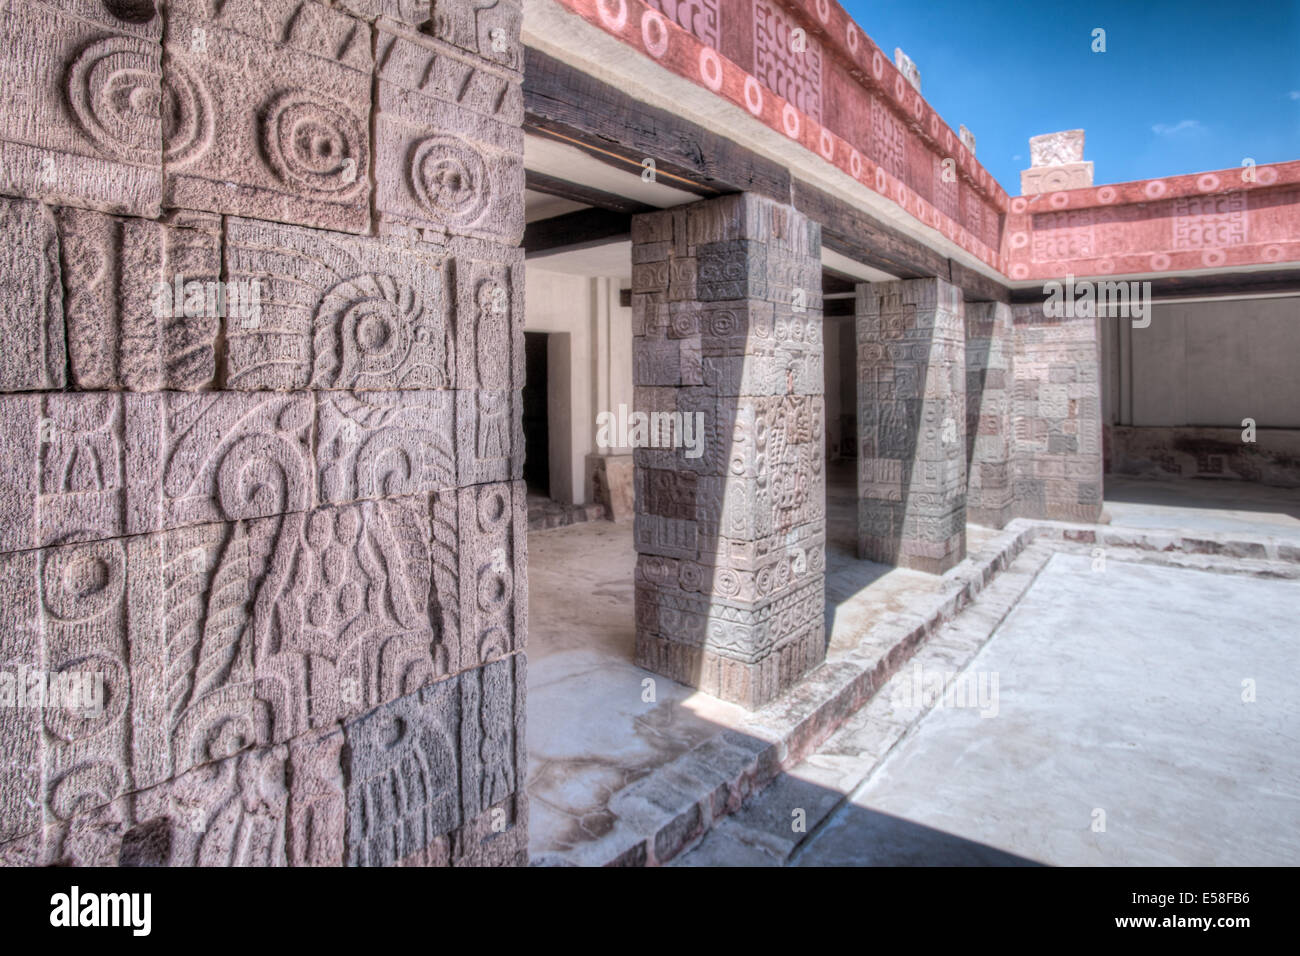 Stone carved pillars line the interior of the Quetzalpapalotl's Palace in Teotihuacan, Mexico. Stock Photo